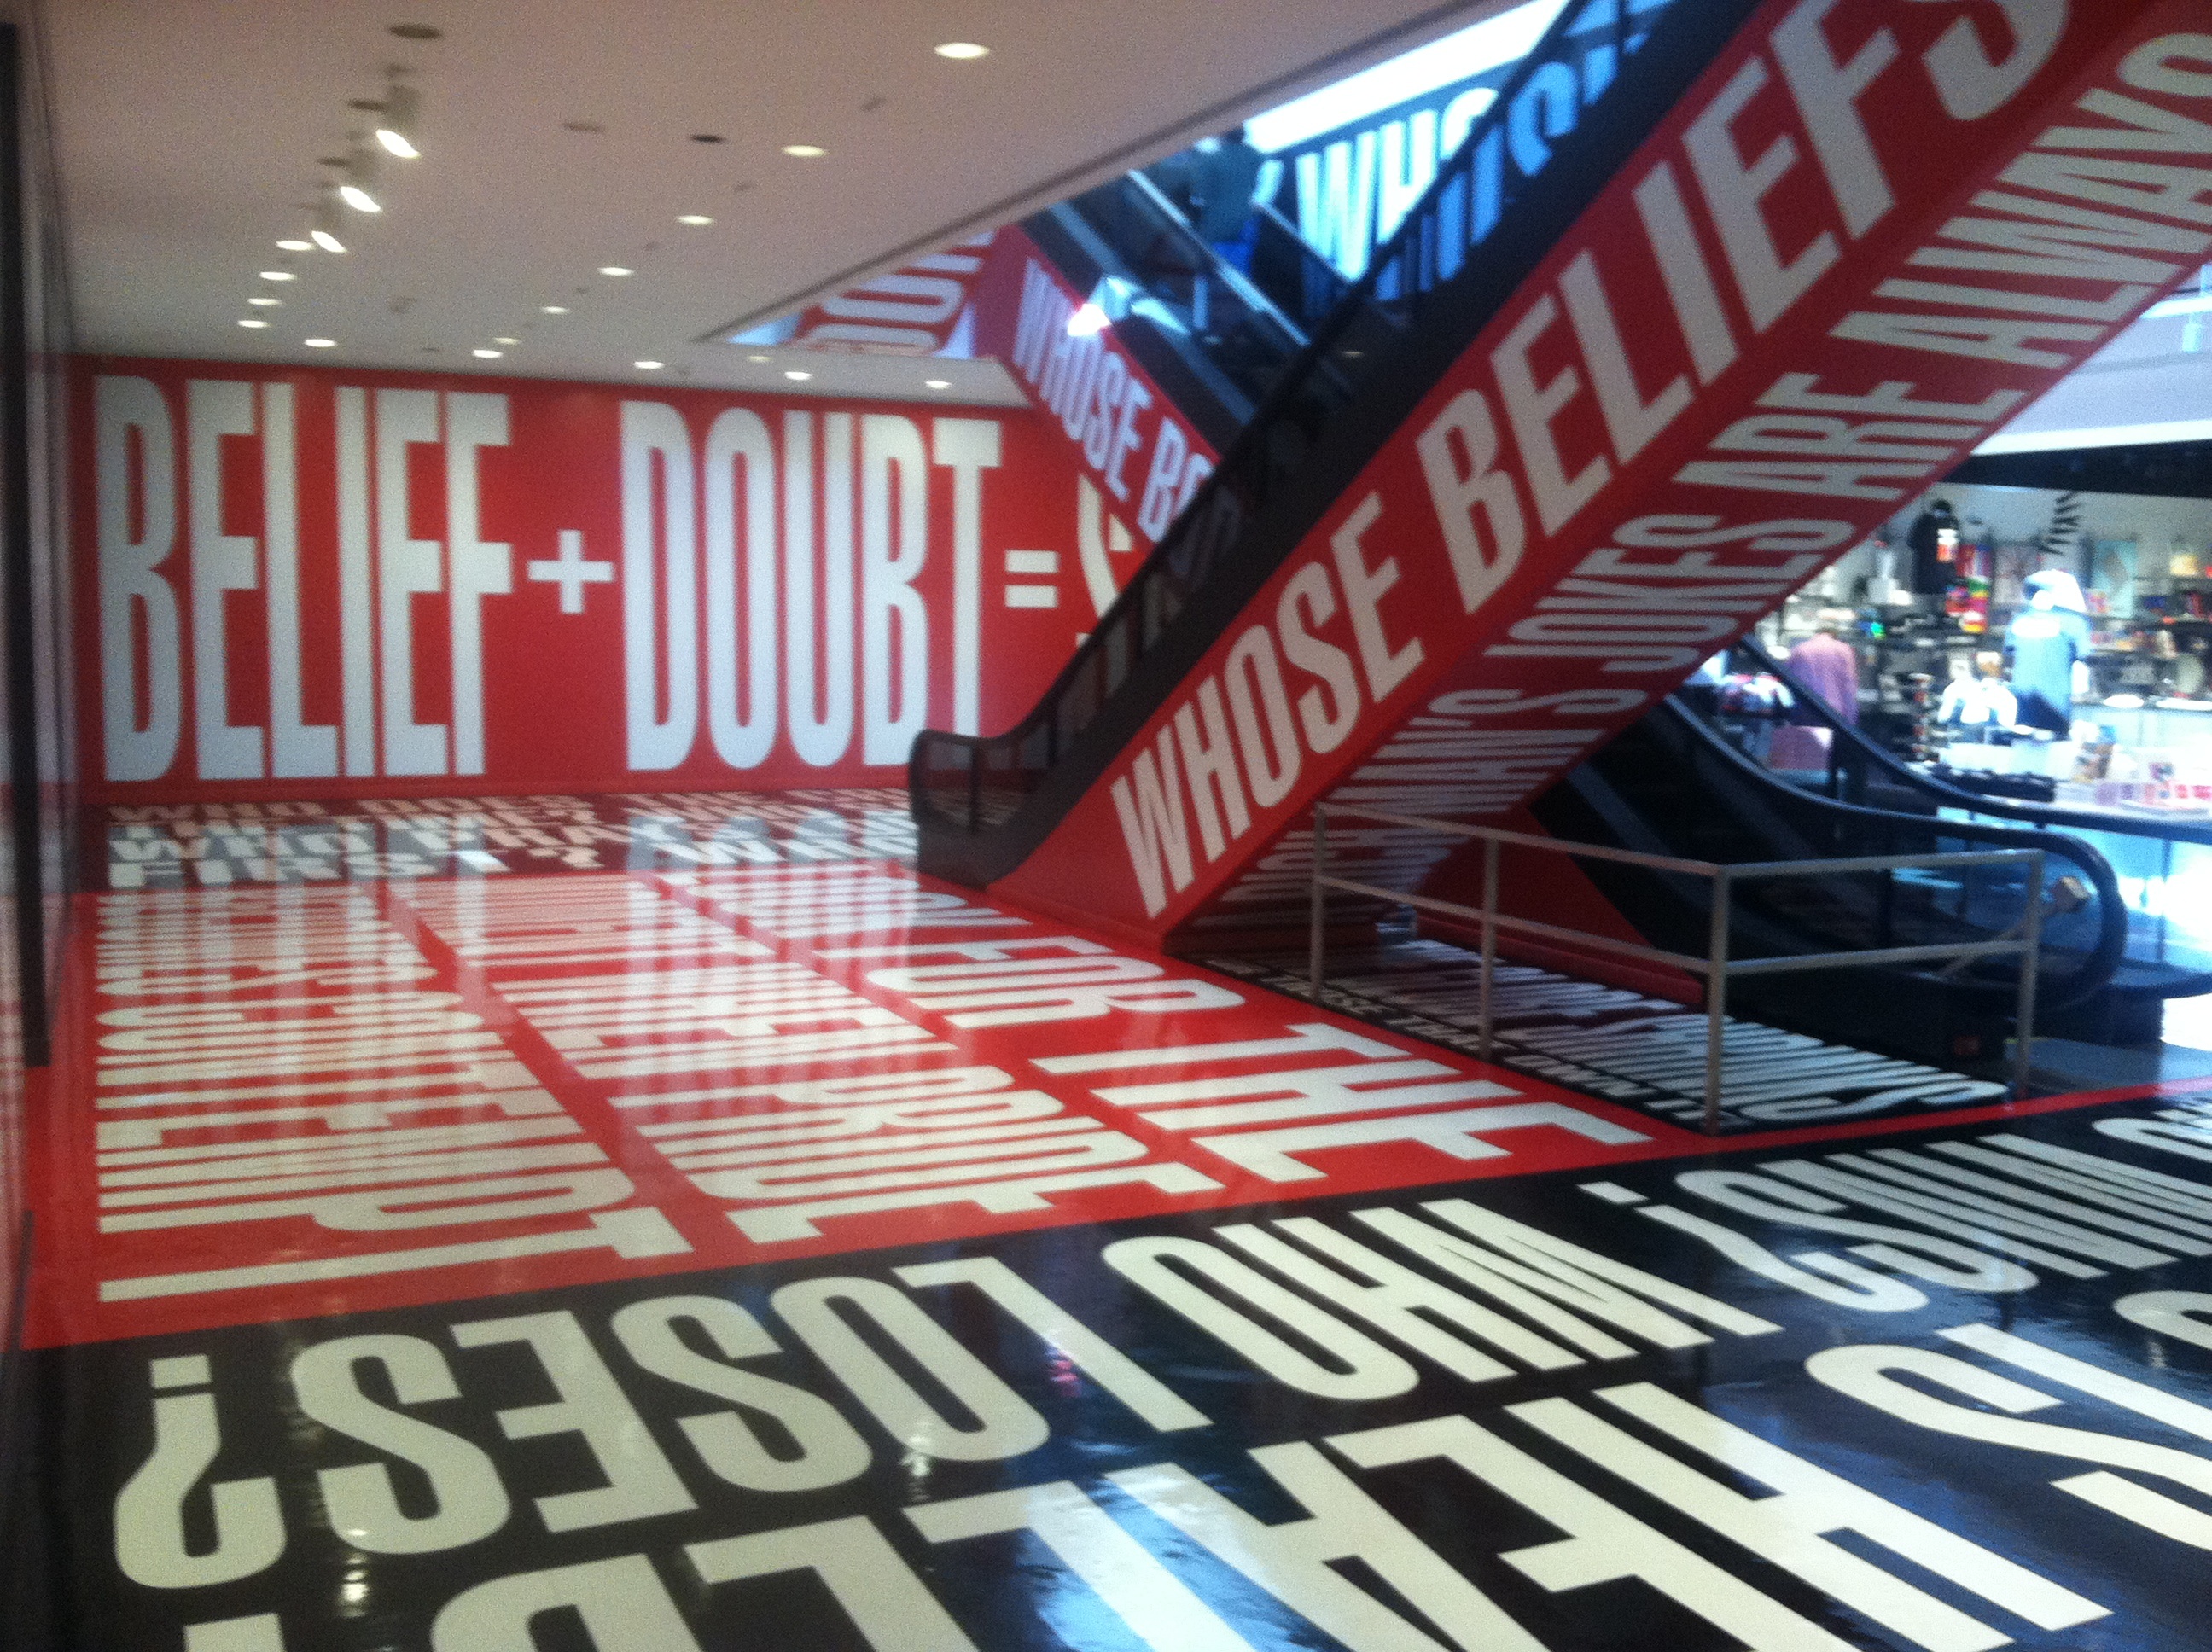 Barbara Kruger Exhibit at Hirshhorn, Yes, No, Maybe exhibit and Kerr James Marshall at the National Gallery